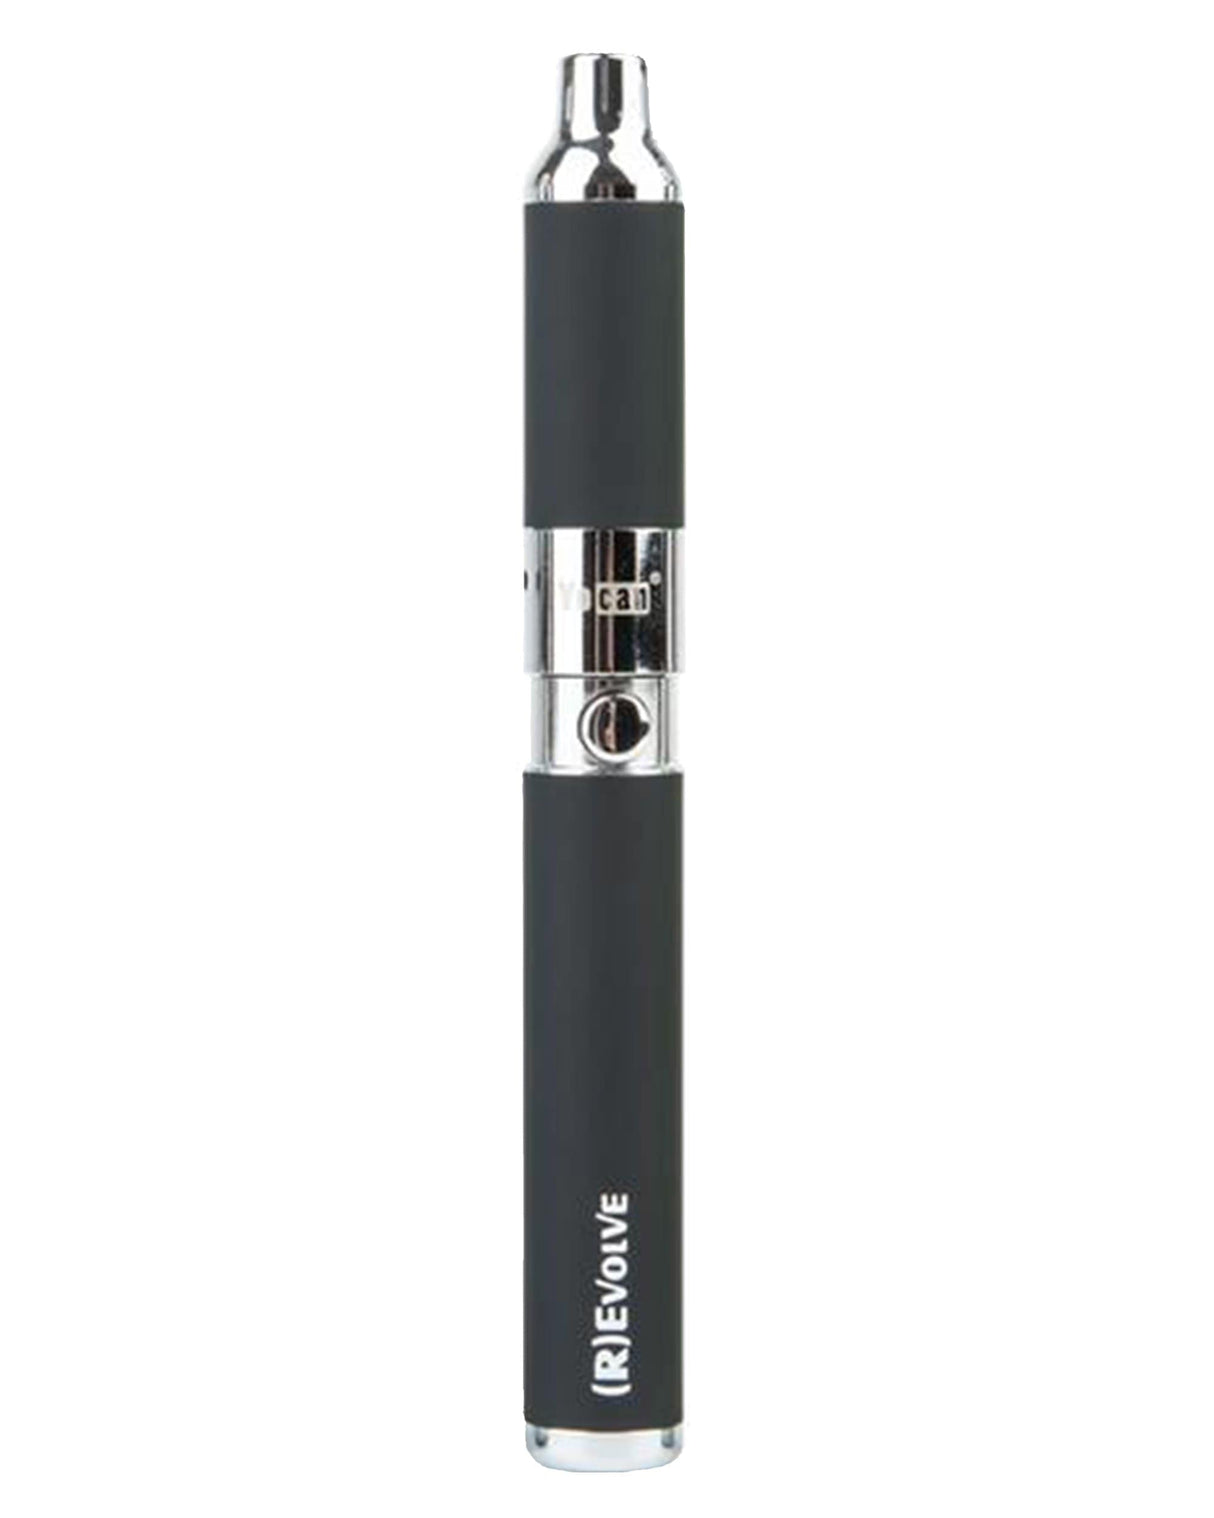 Yocan (R)Evolve Dab/Wax Pen in Black - Portable 650mAh Battery Vaporizer for Concentrates